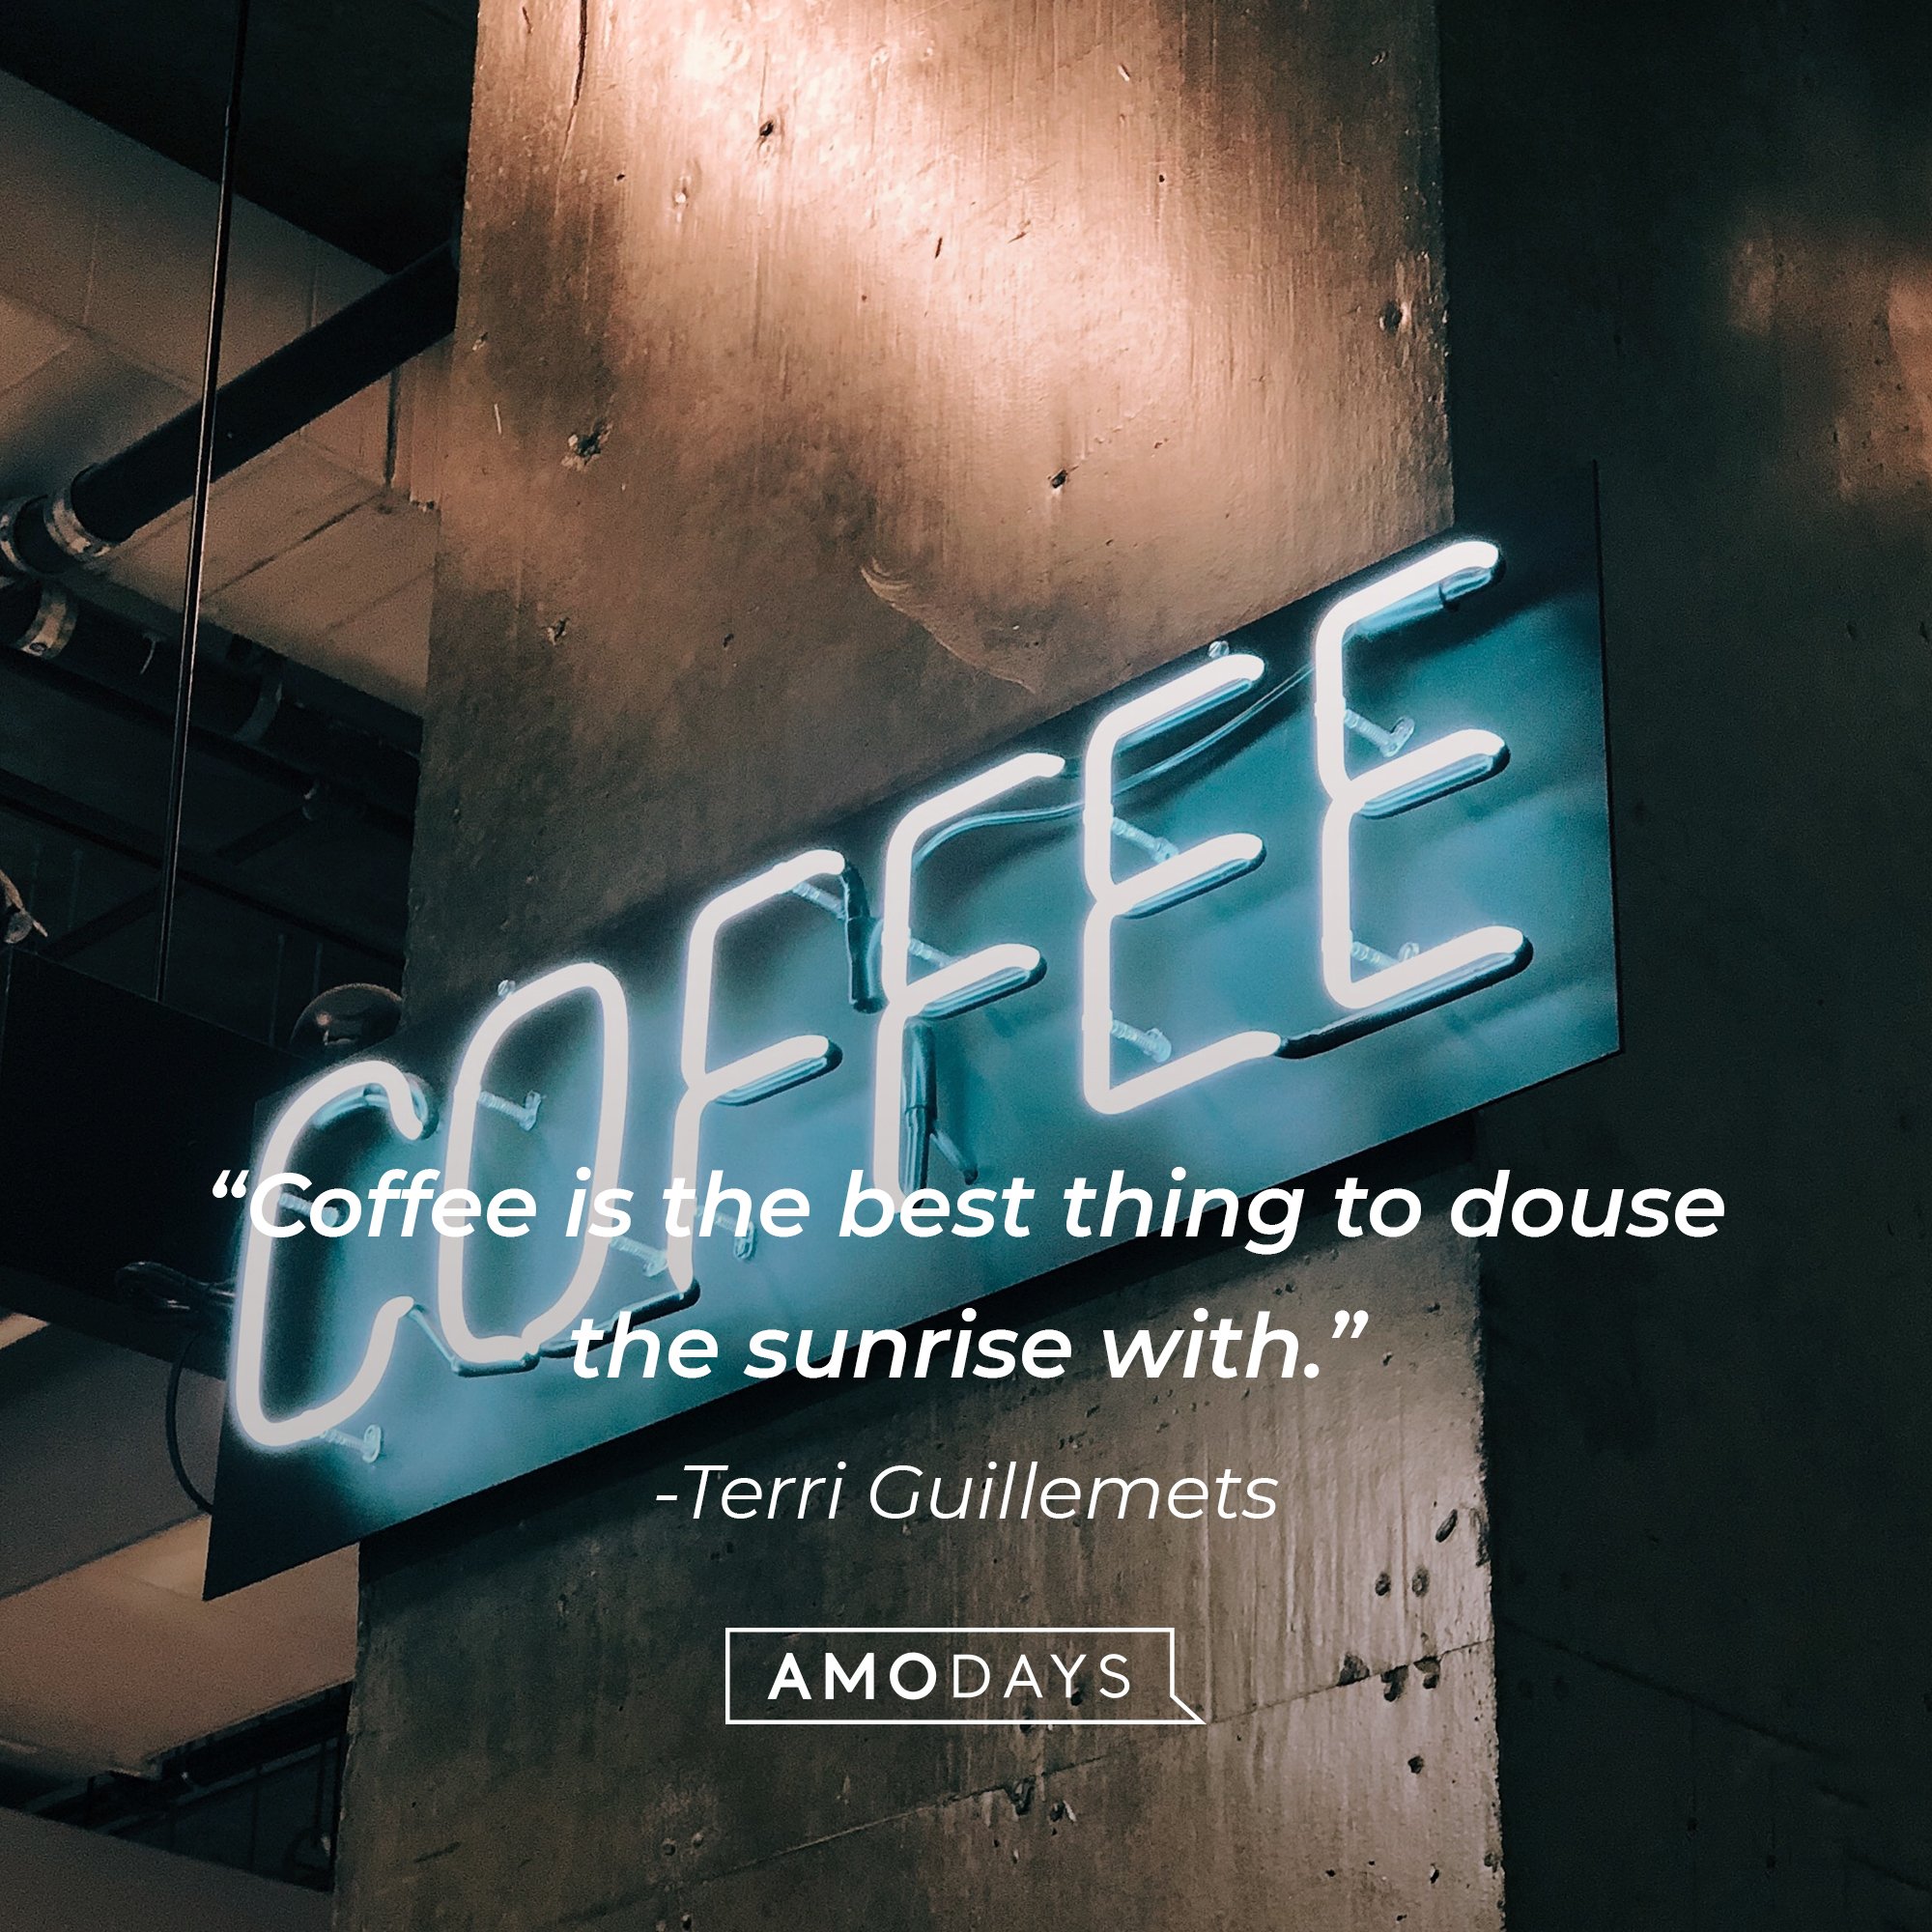 Terri Guillemets' quote: "Coffee is the best thing to douse the sunrise with." | Image: AmoDays